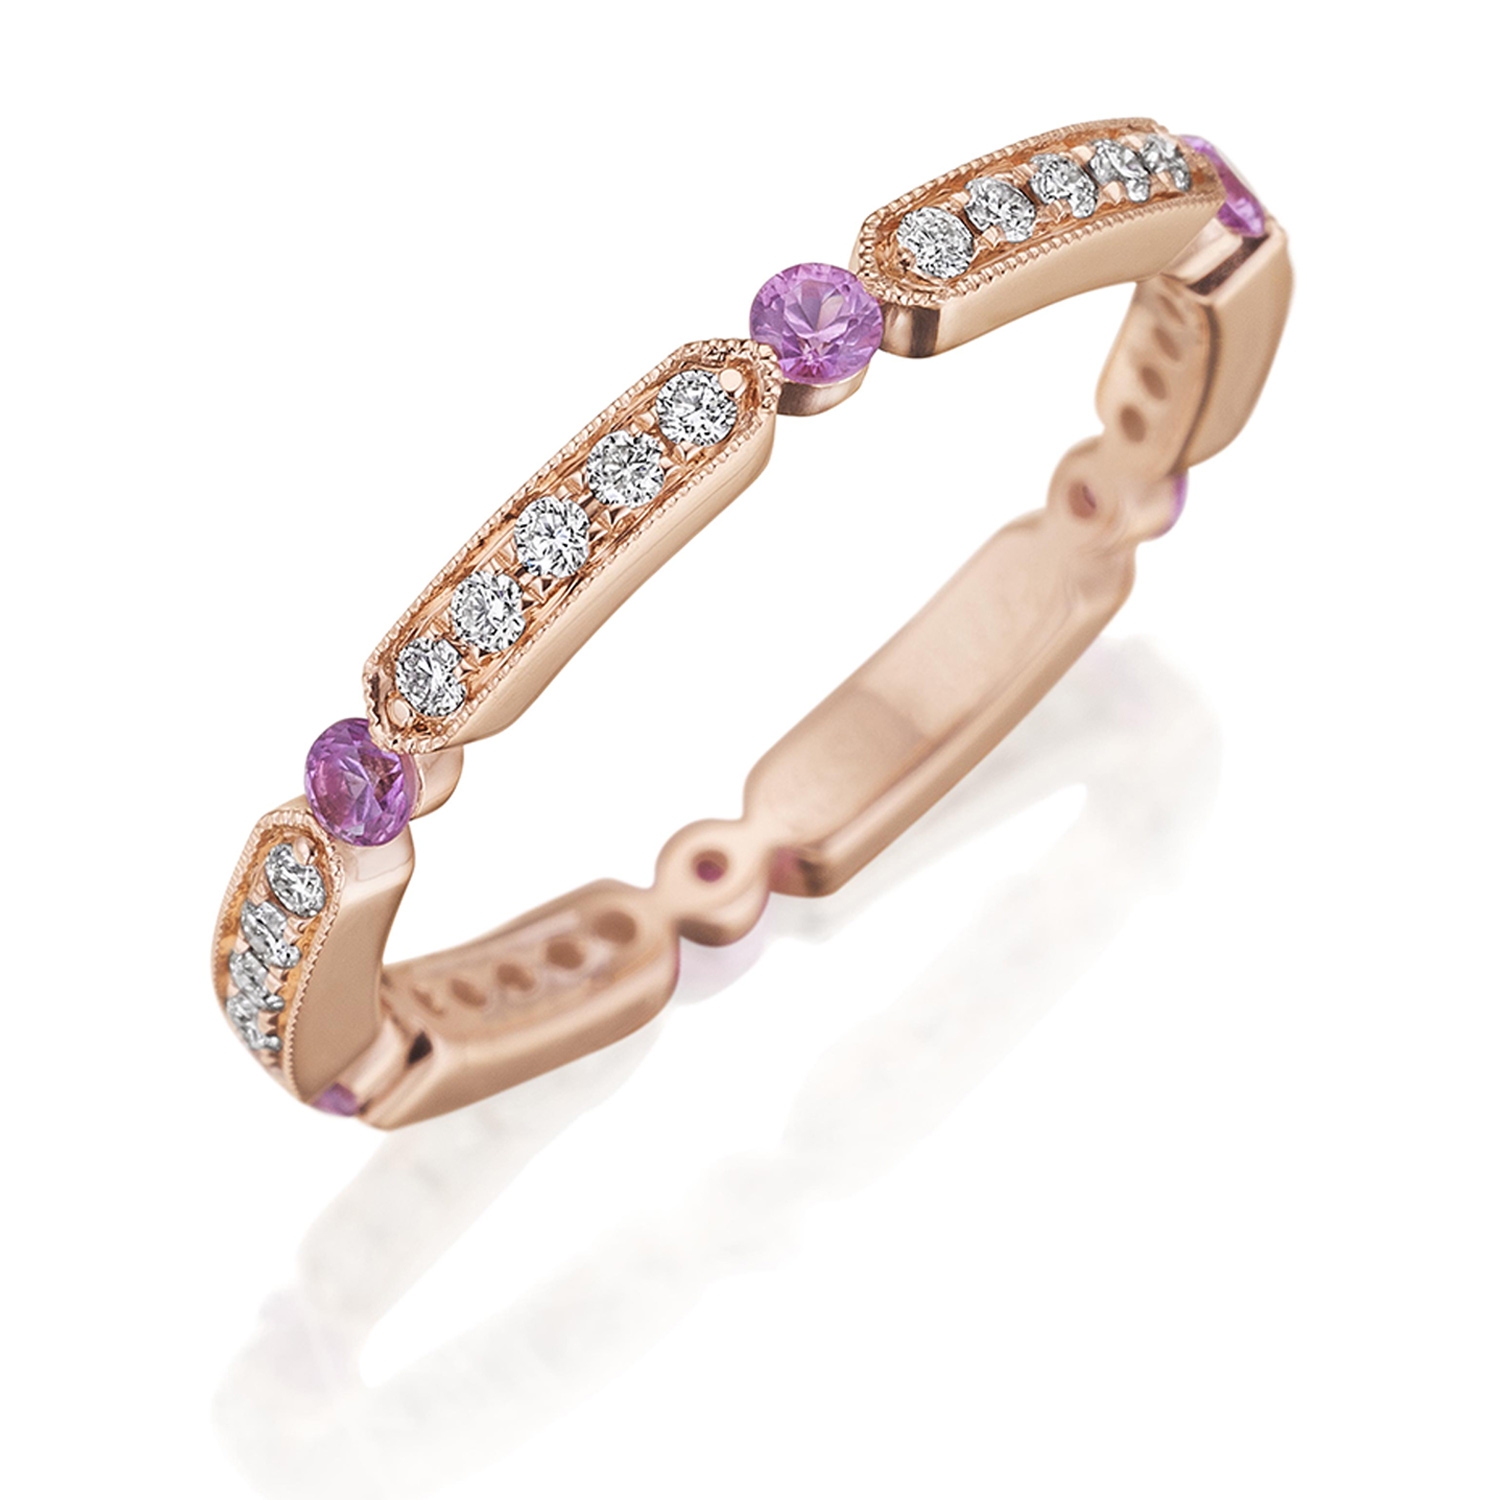 Henri Daussi R44-7 Rose Gold Bead Set Diamond and Pink Sapphire Band with Miligrain Detail Alternative View 2